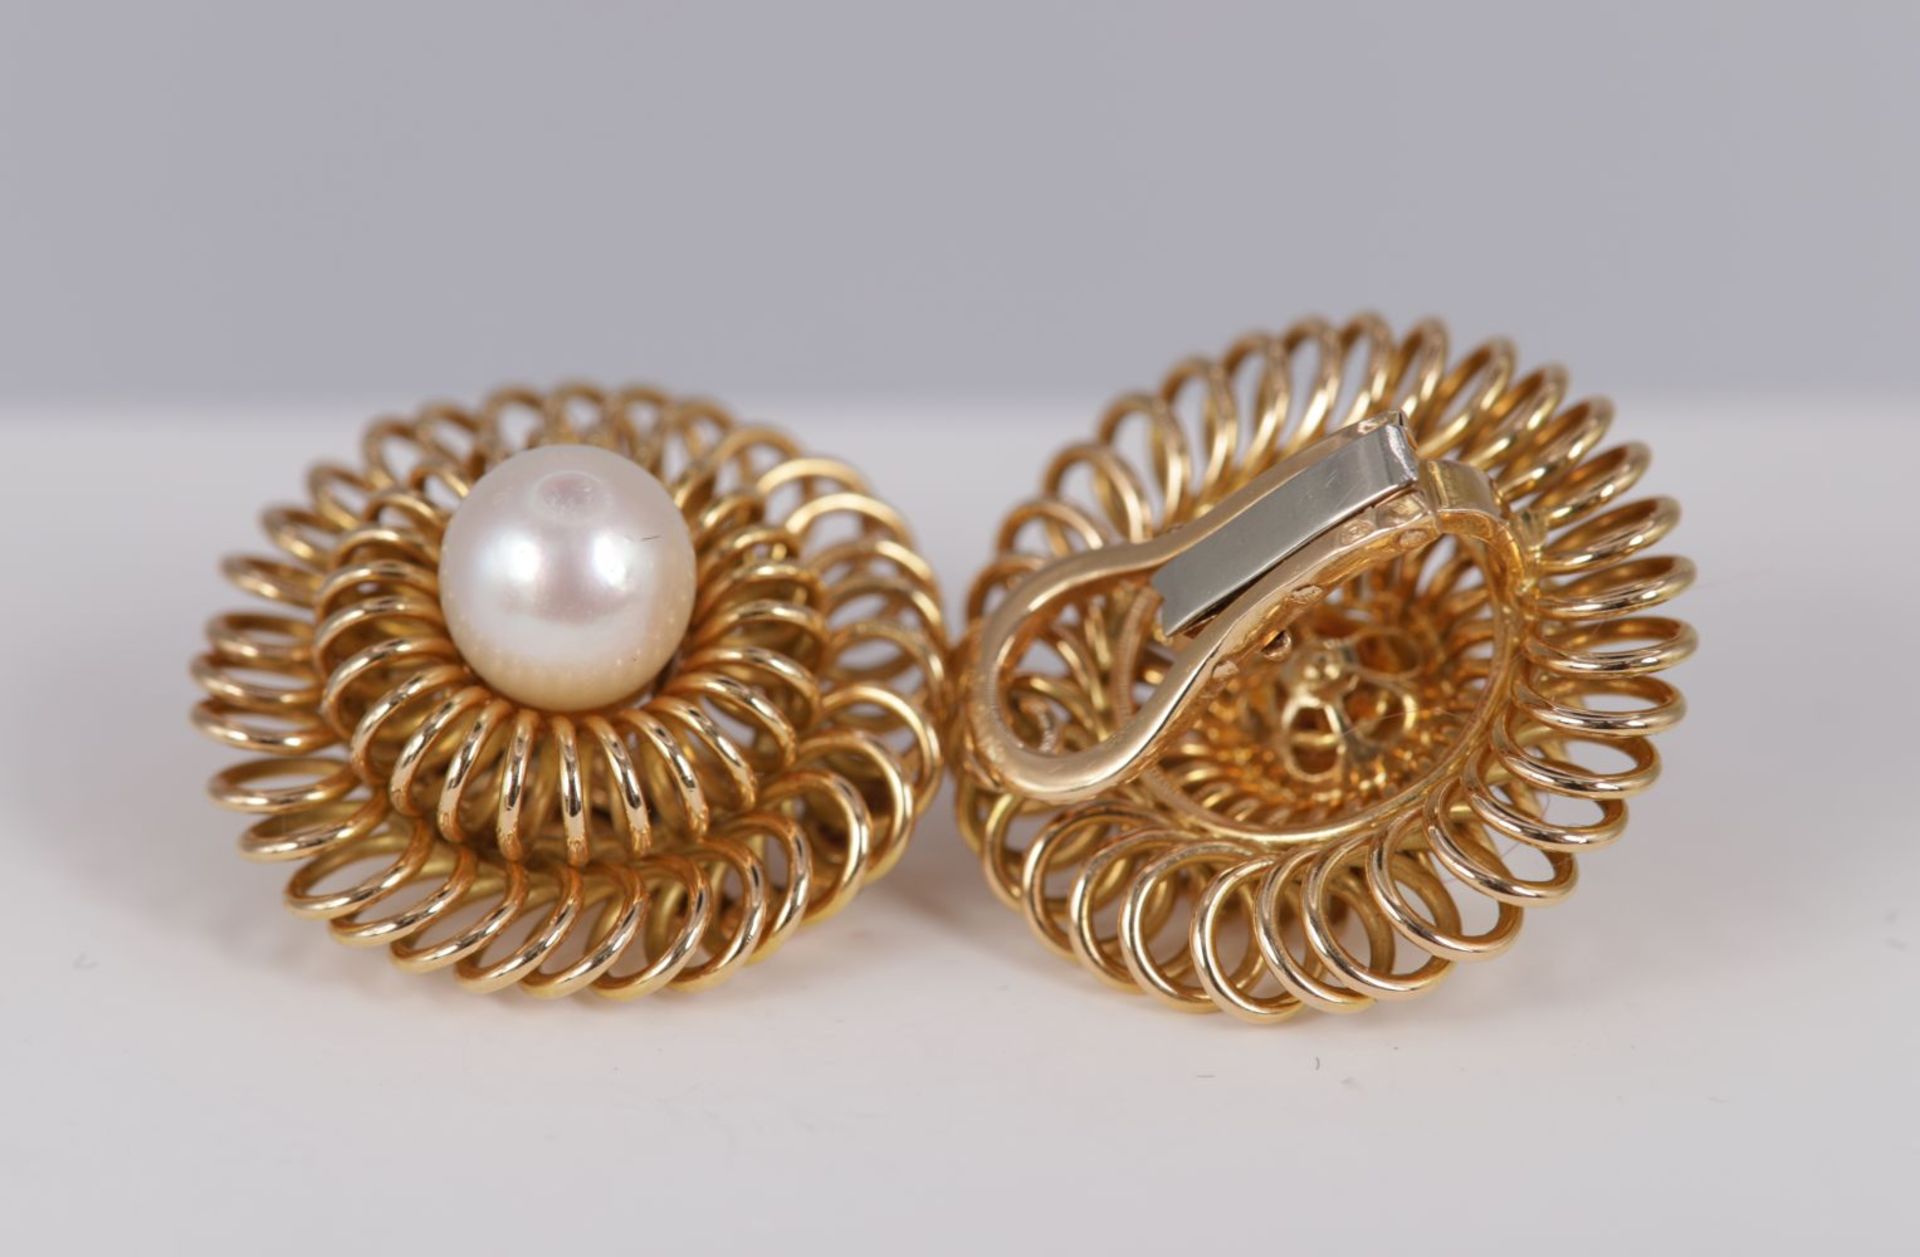 PAIR 18K YELLOW GOLD & PEARL ROUND EARRINGS - Image 3 of 3